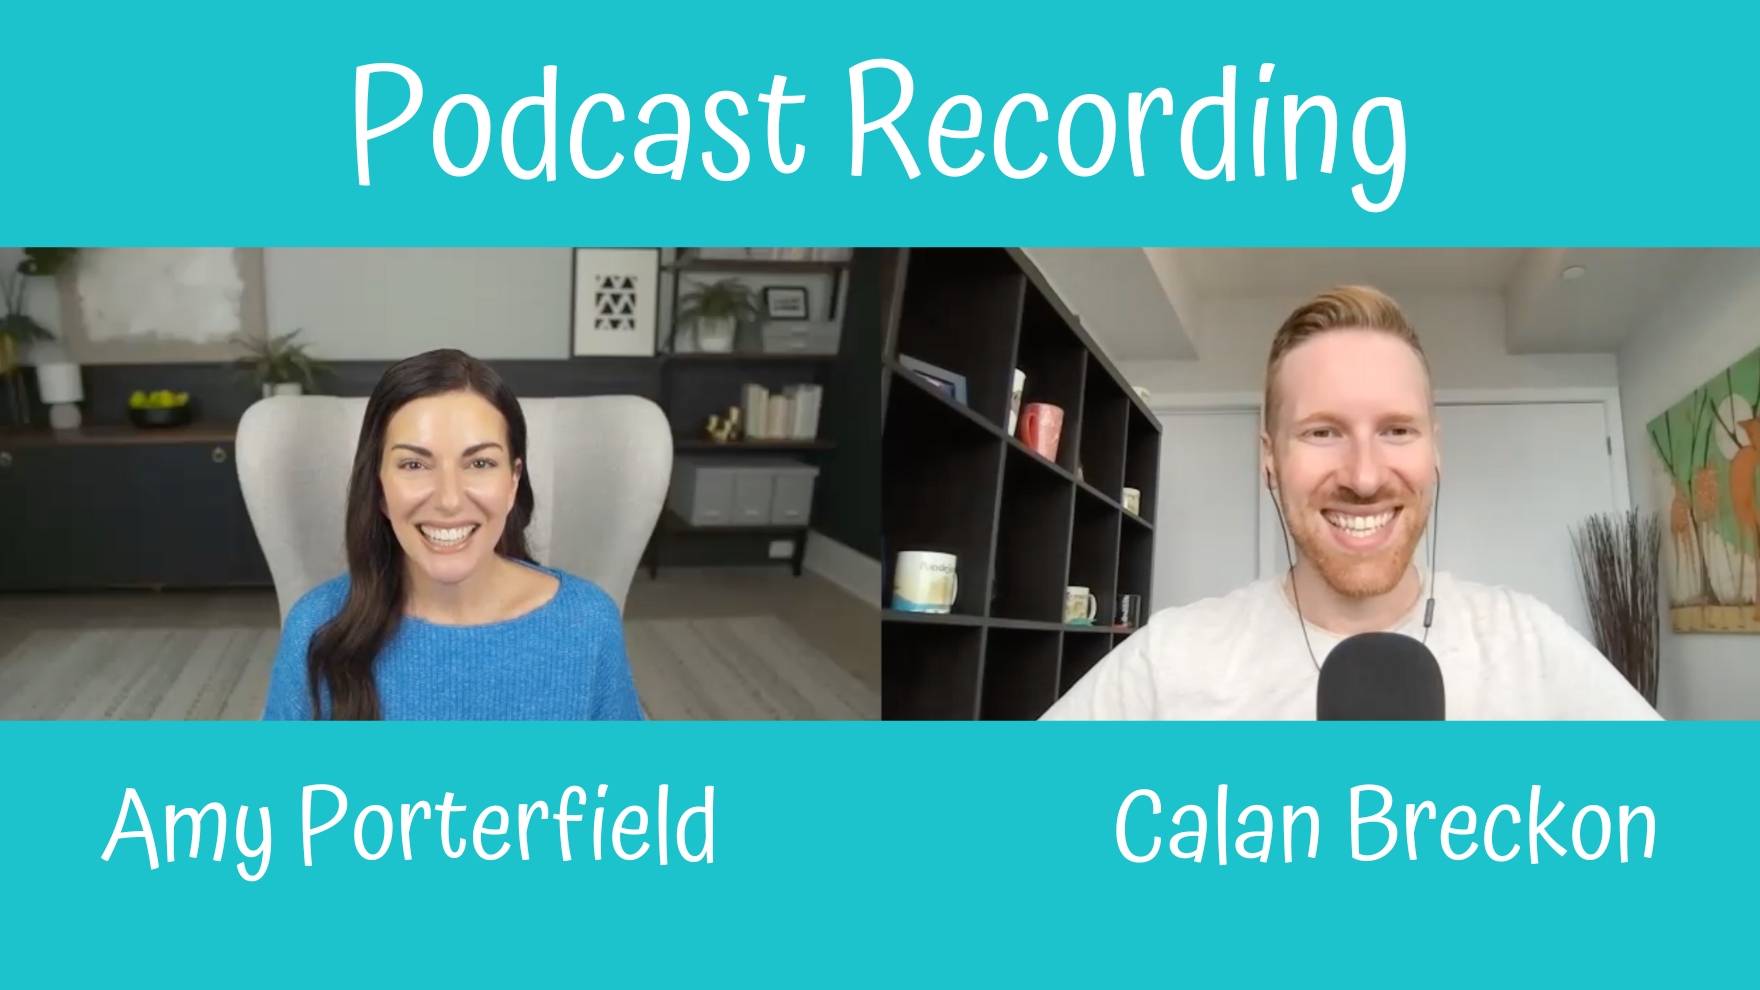 Amy Porterfield Podcasting with Calan Breckon